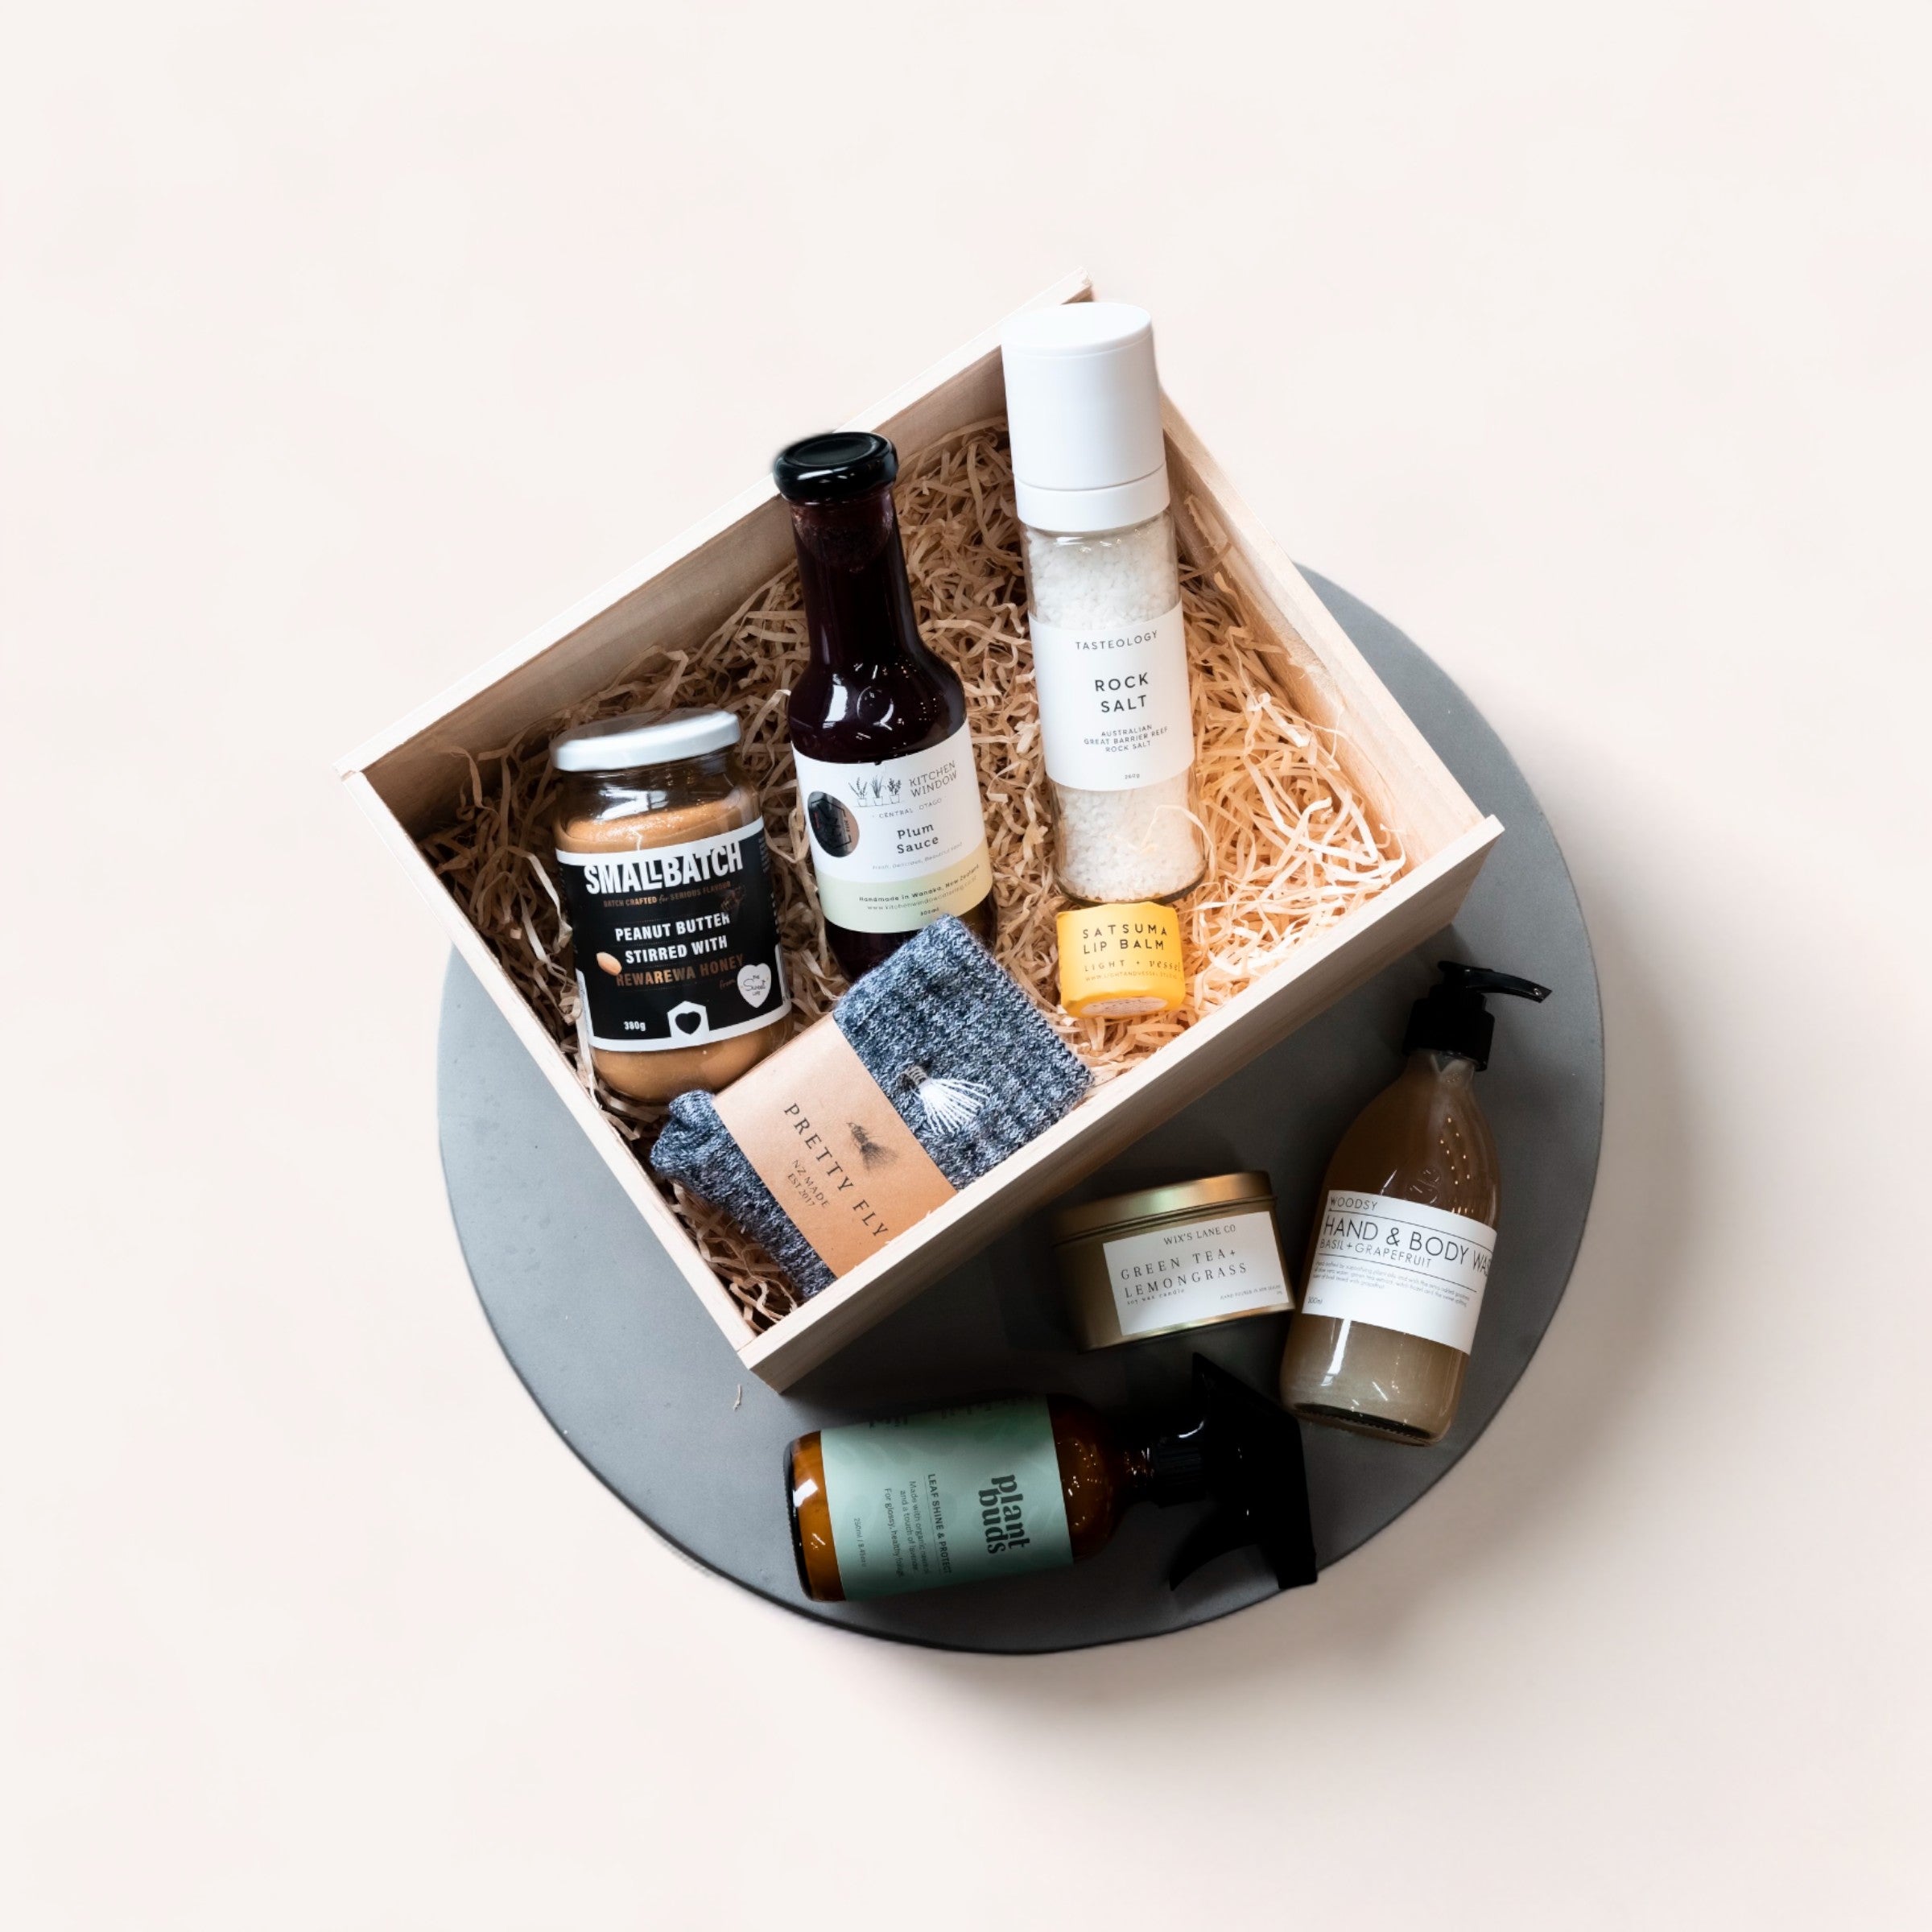 A curated Build Your Own Giftbox from giftbox co. filled with luxury items, including skincare products and gourmet food, beautifully arranged on a round concrete plate against a neutral background, accompanied by a personalised handwritten card.